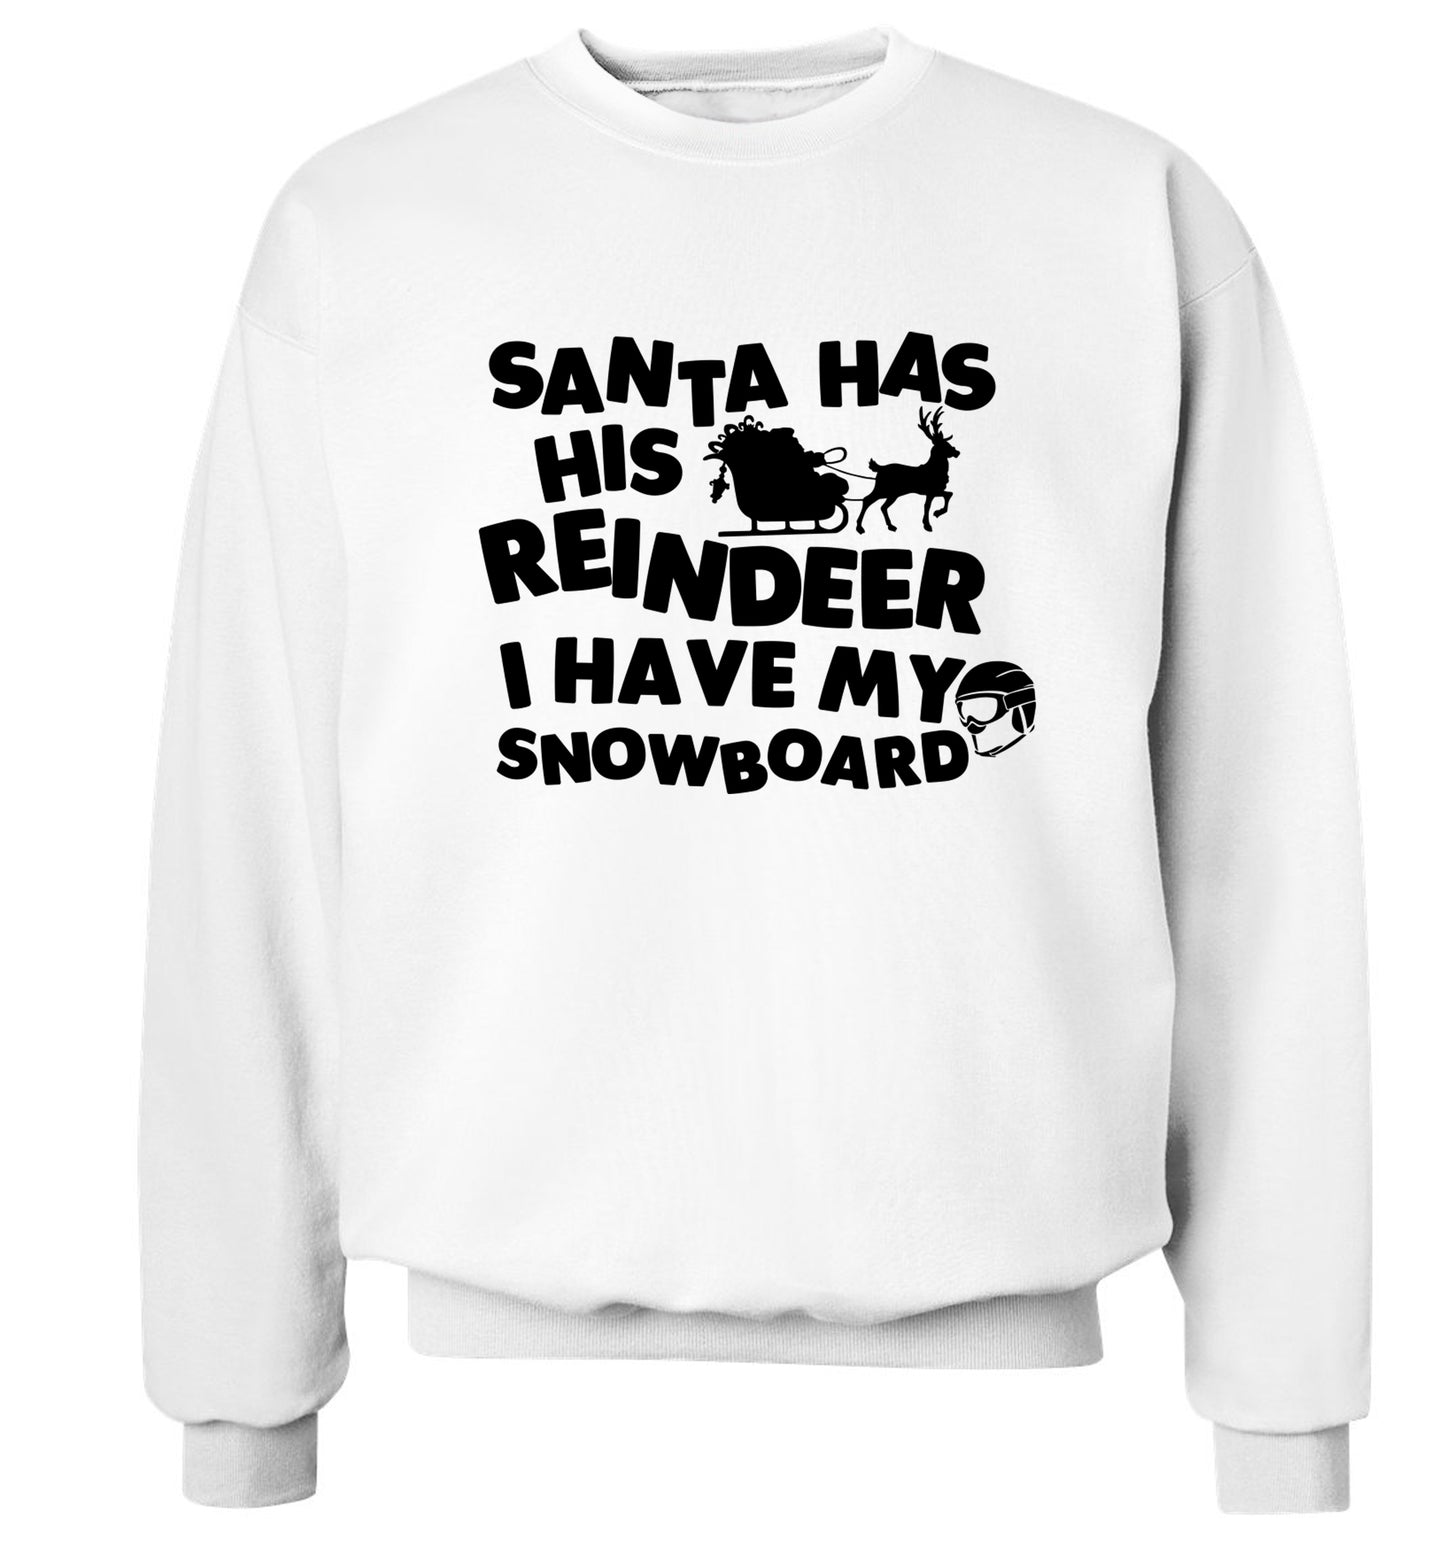 Santa has his reindeer I have my snowboard Adult's unisex white Sweater 2XL